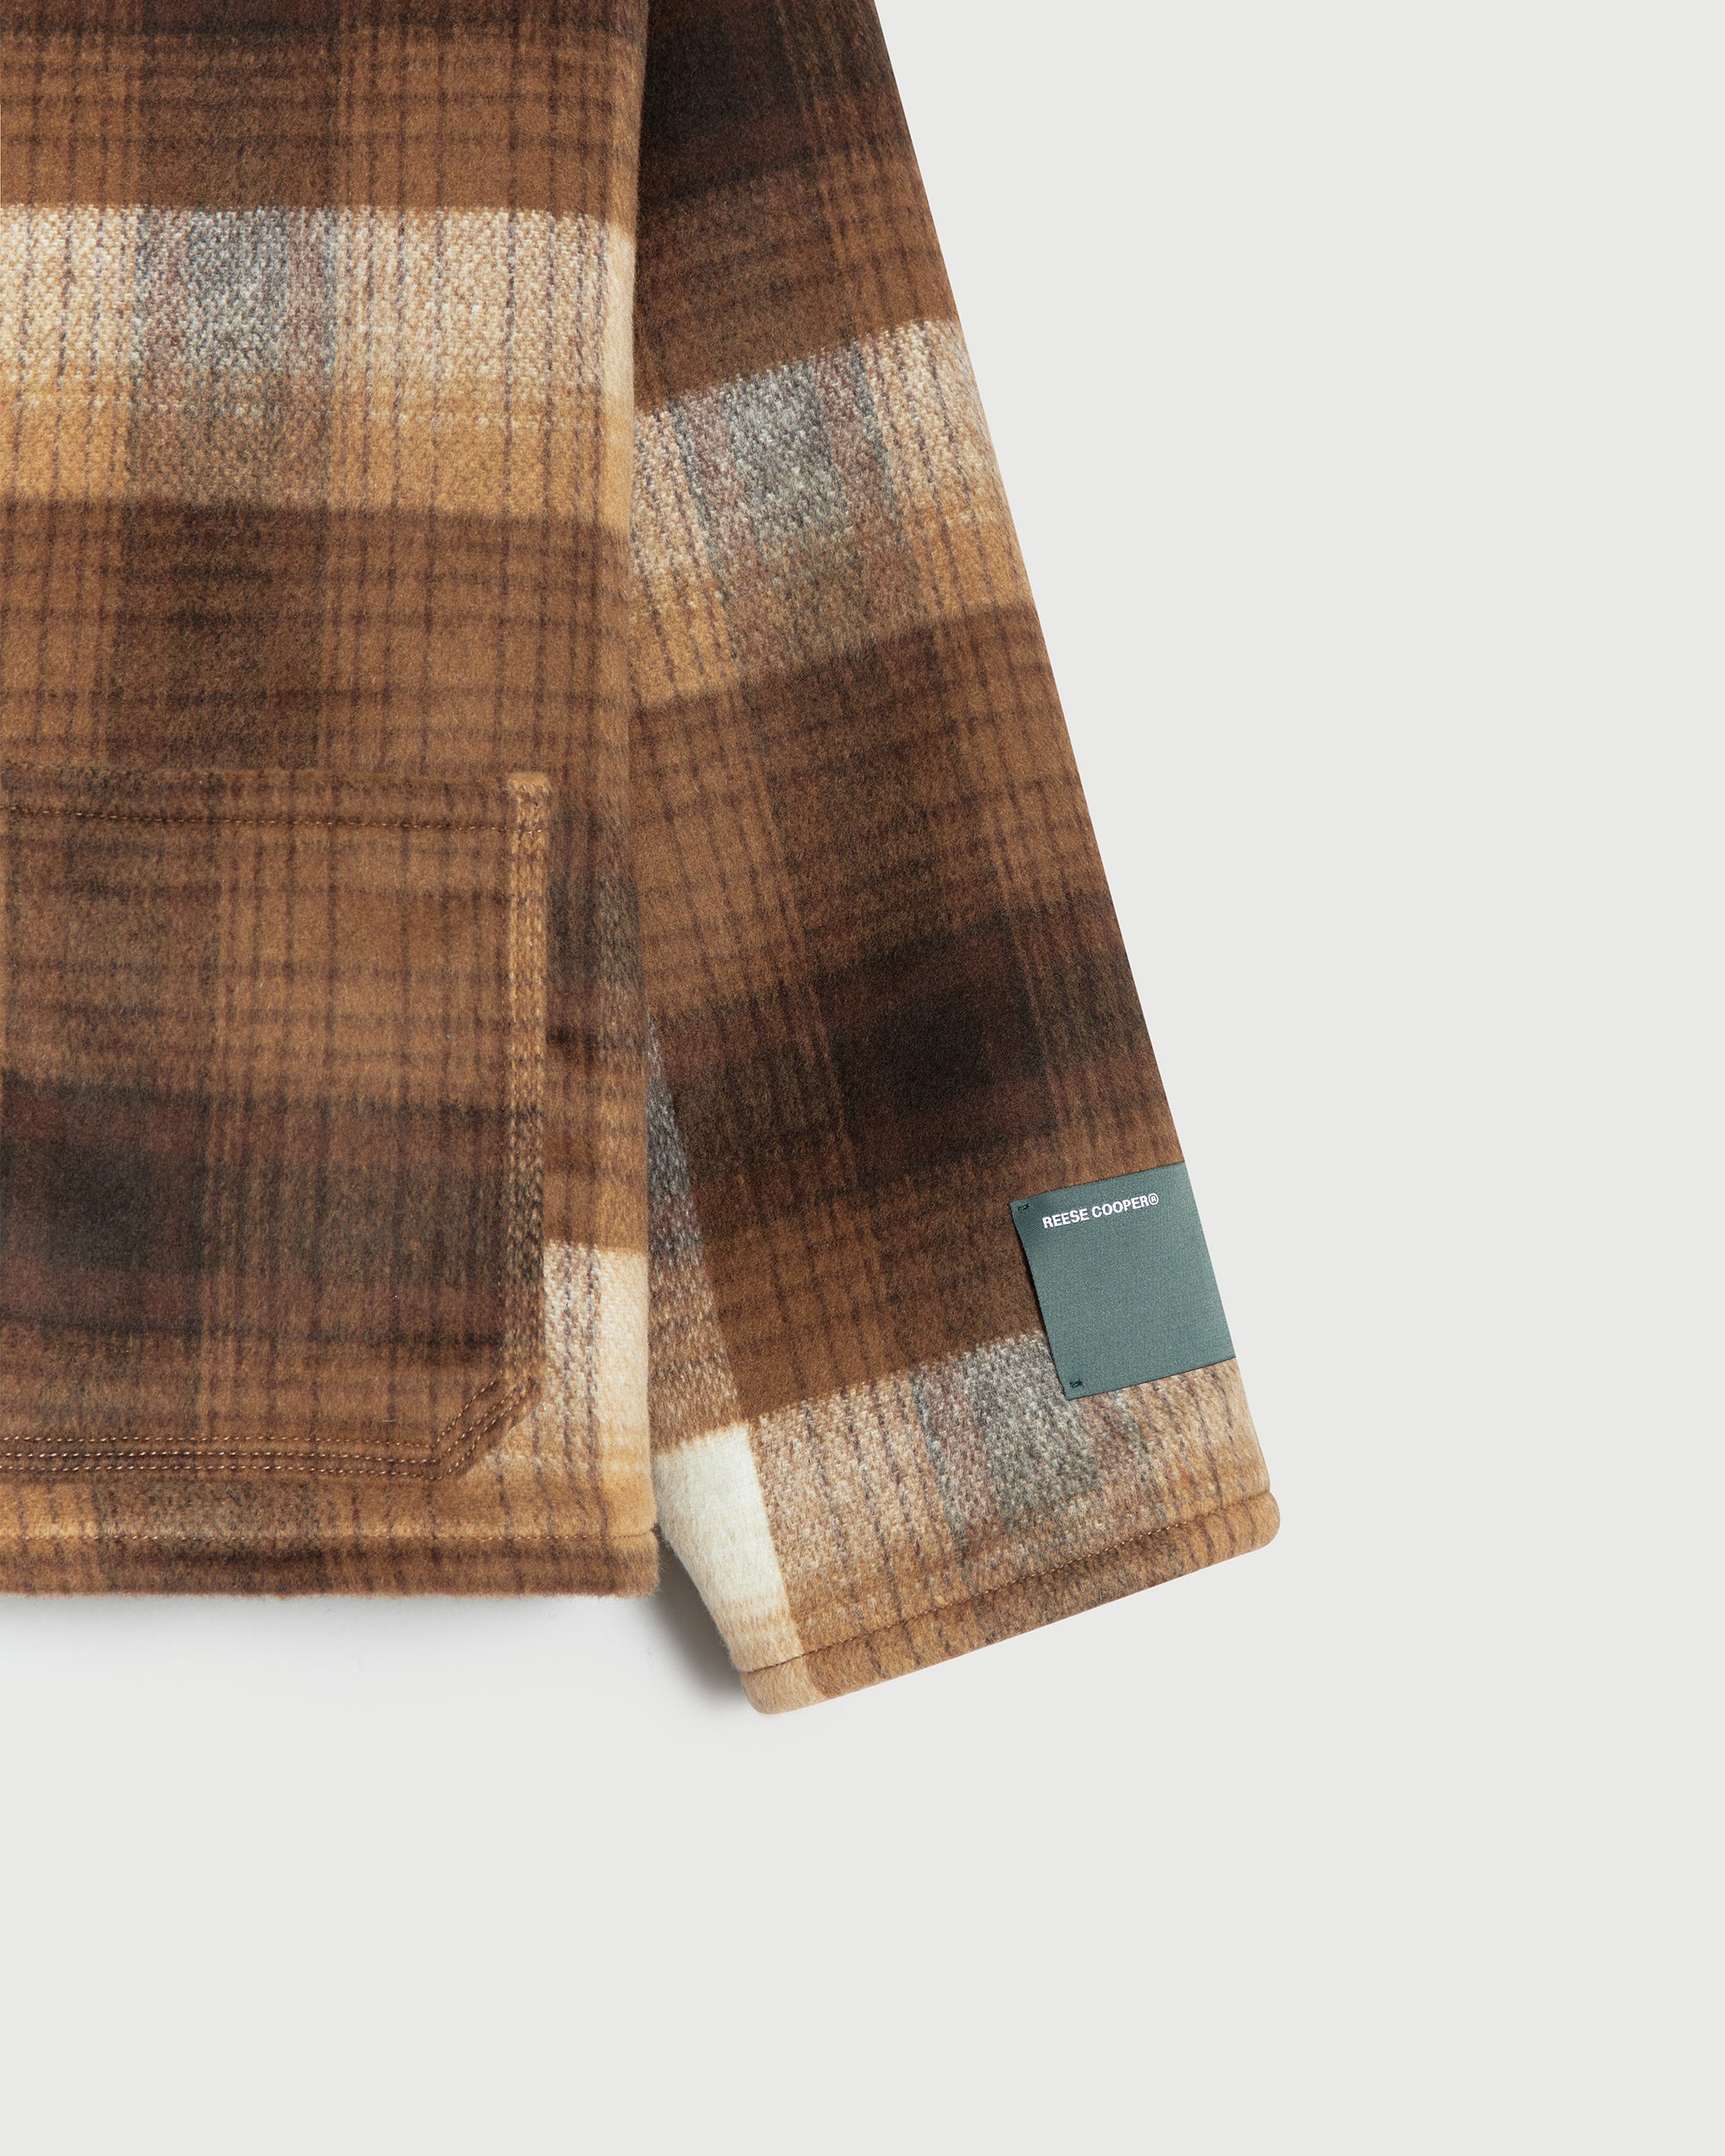 RCI Reserve: Chore Coat in Brown Wool Flannel